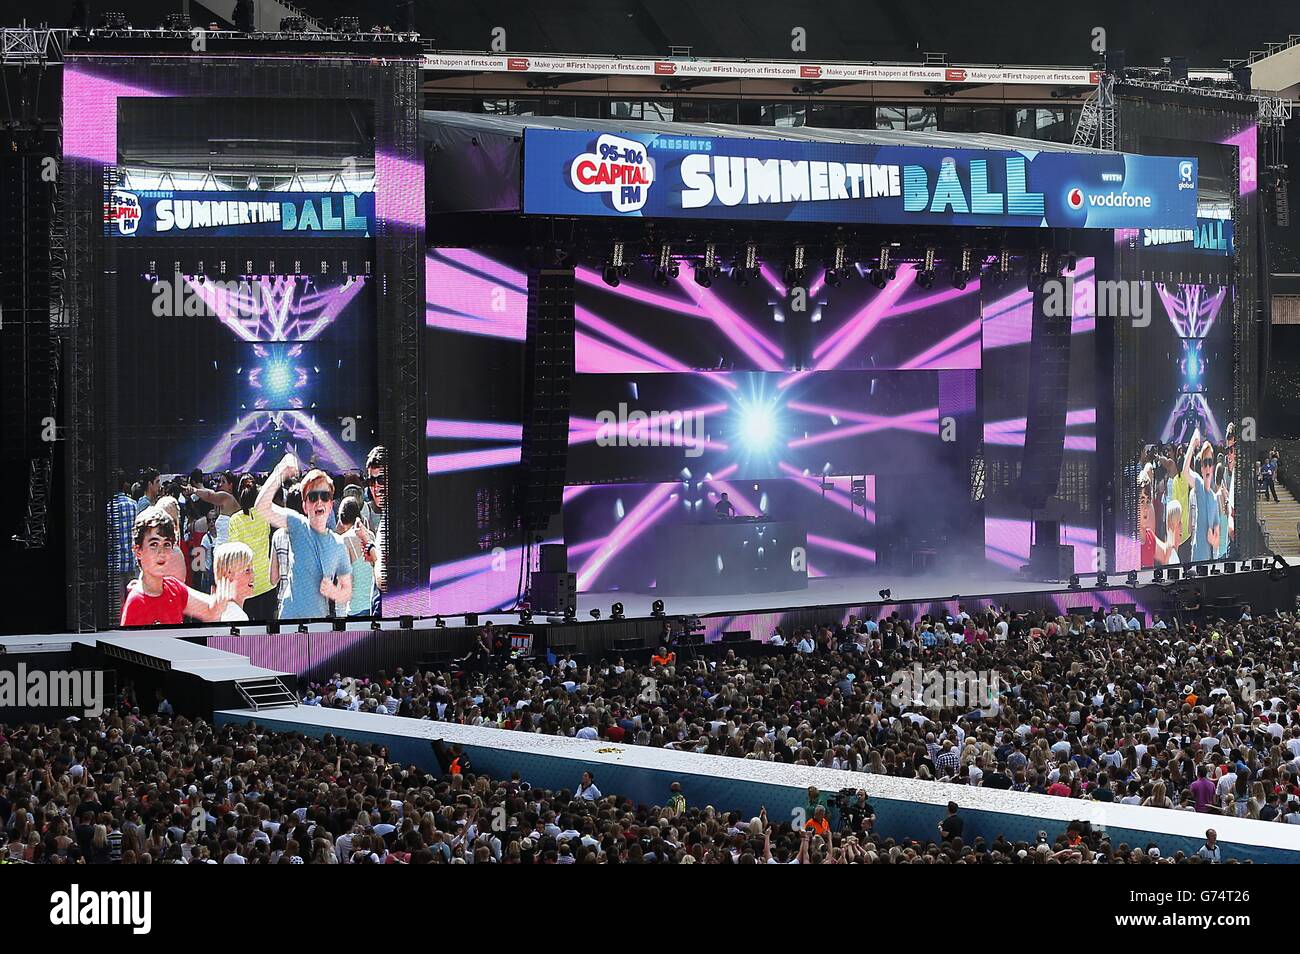 A view of the mains stage as Calvin Harris plays during Capital FM's Summertime Ball at Wembley Stadium, London. Stock Photo